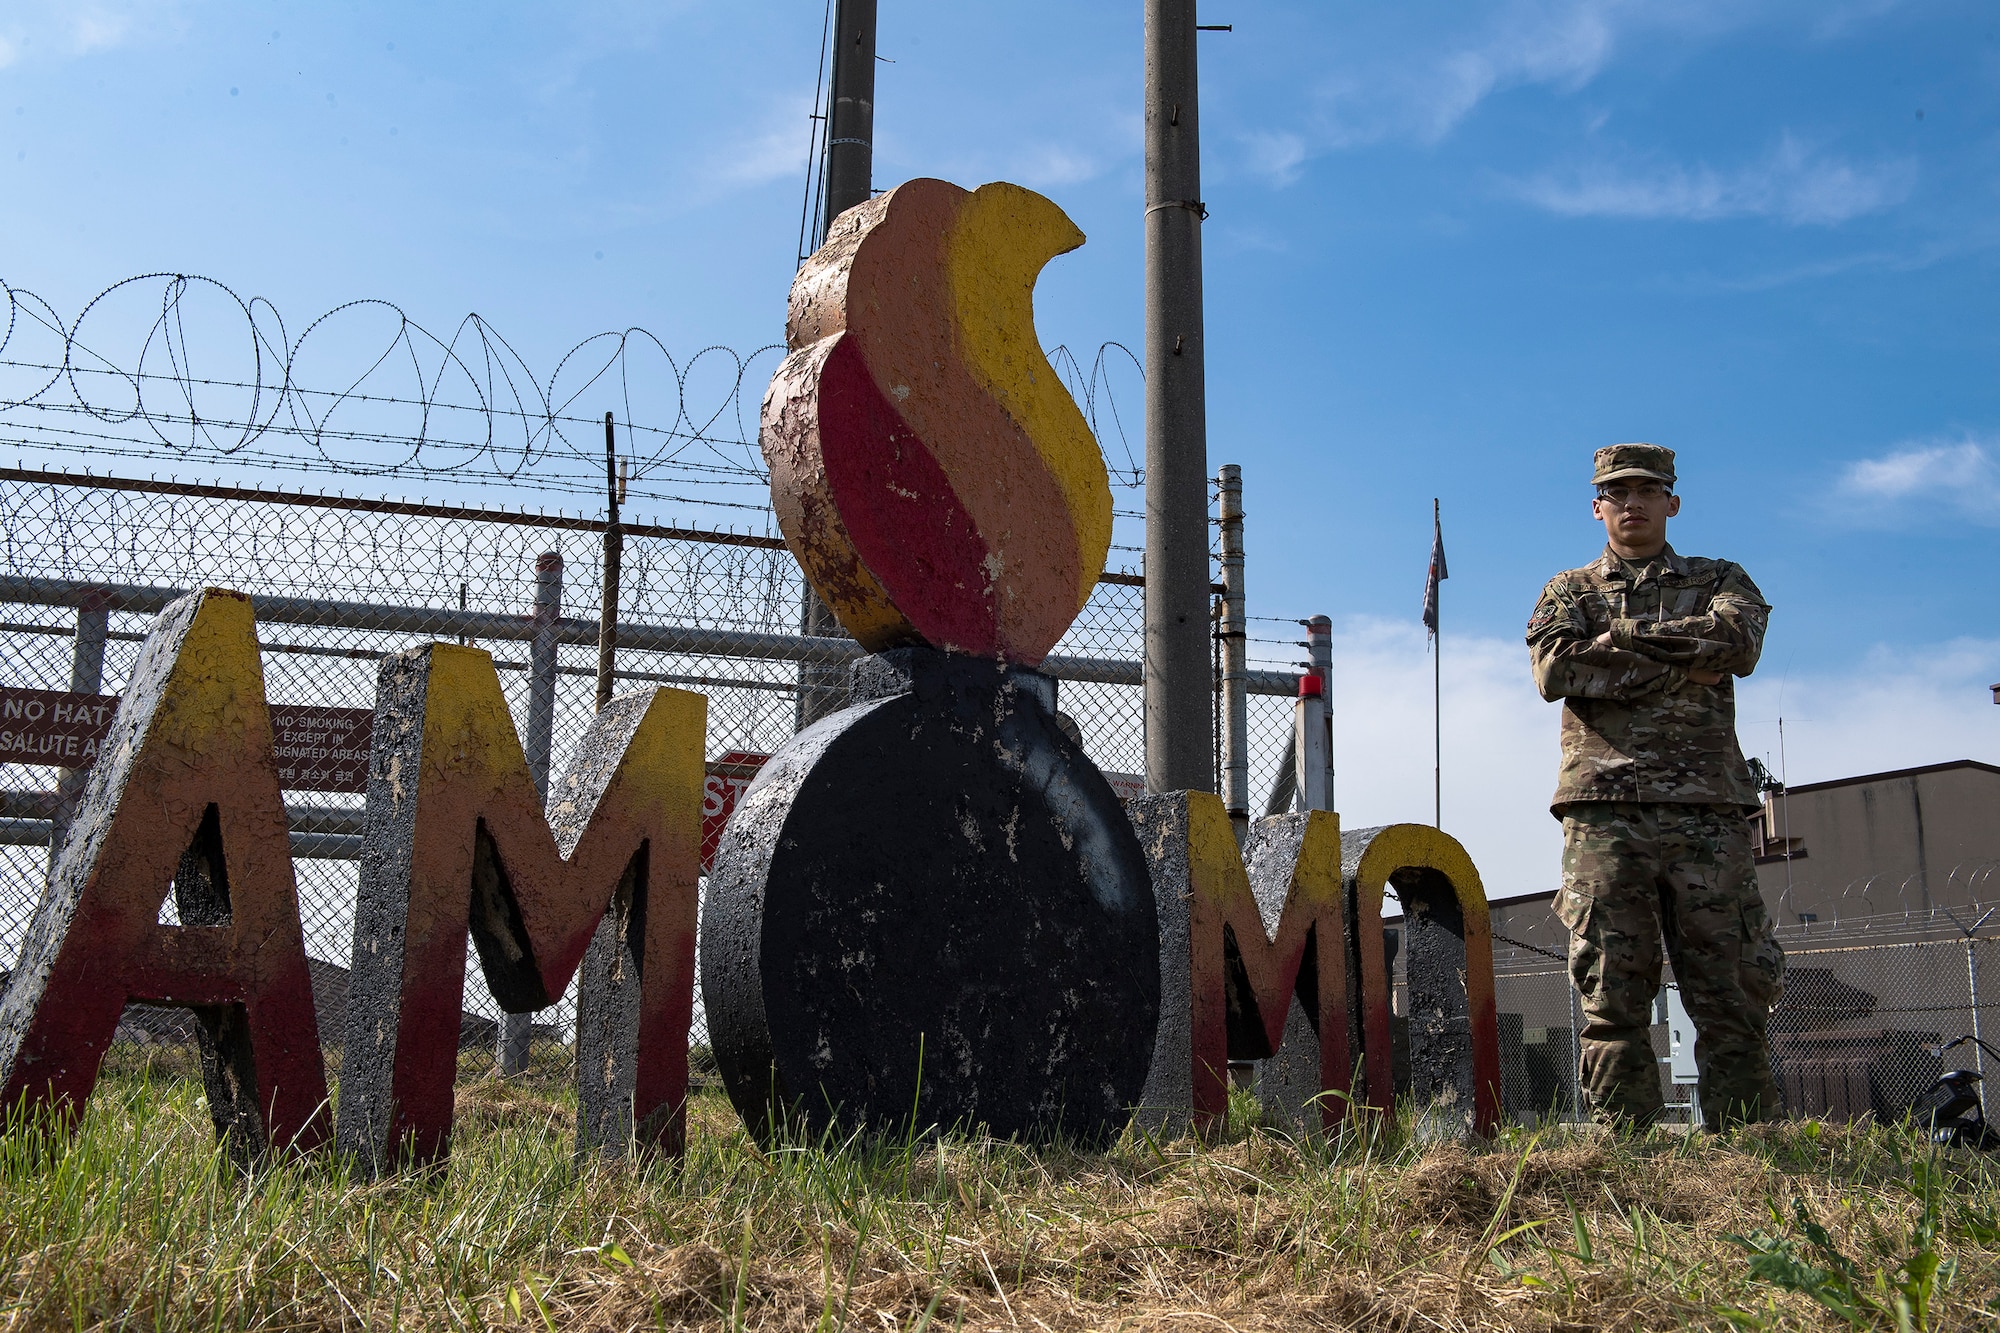 Senior Airman Quinn Harrison, 51st Munitions Squadron munition control technician, poses for a photo, Oct. 25, 2019, at Osan Air Base, Republic of Korea. (U.S. Air Force photo by Staff Sgt. Gregory Nash)